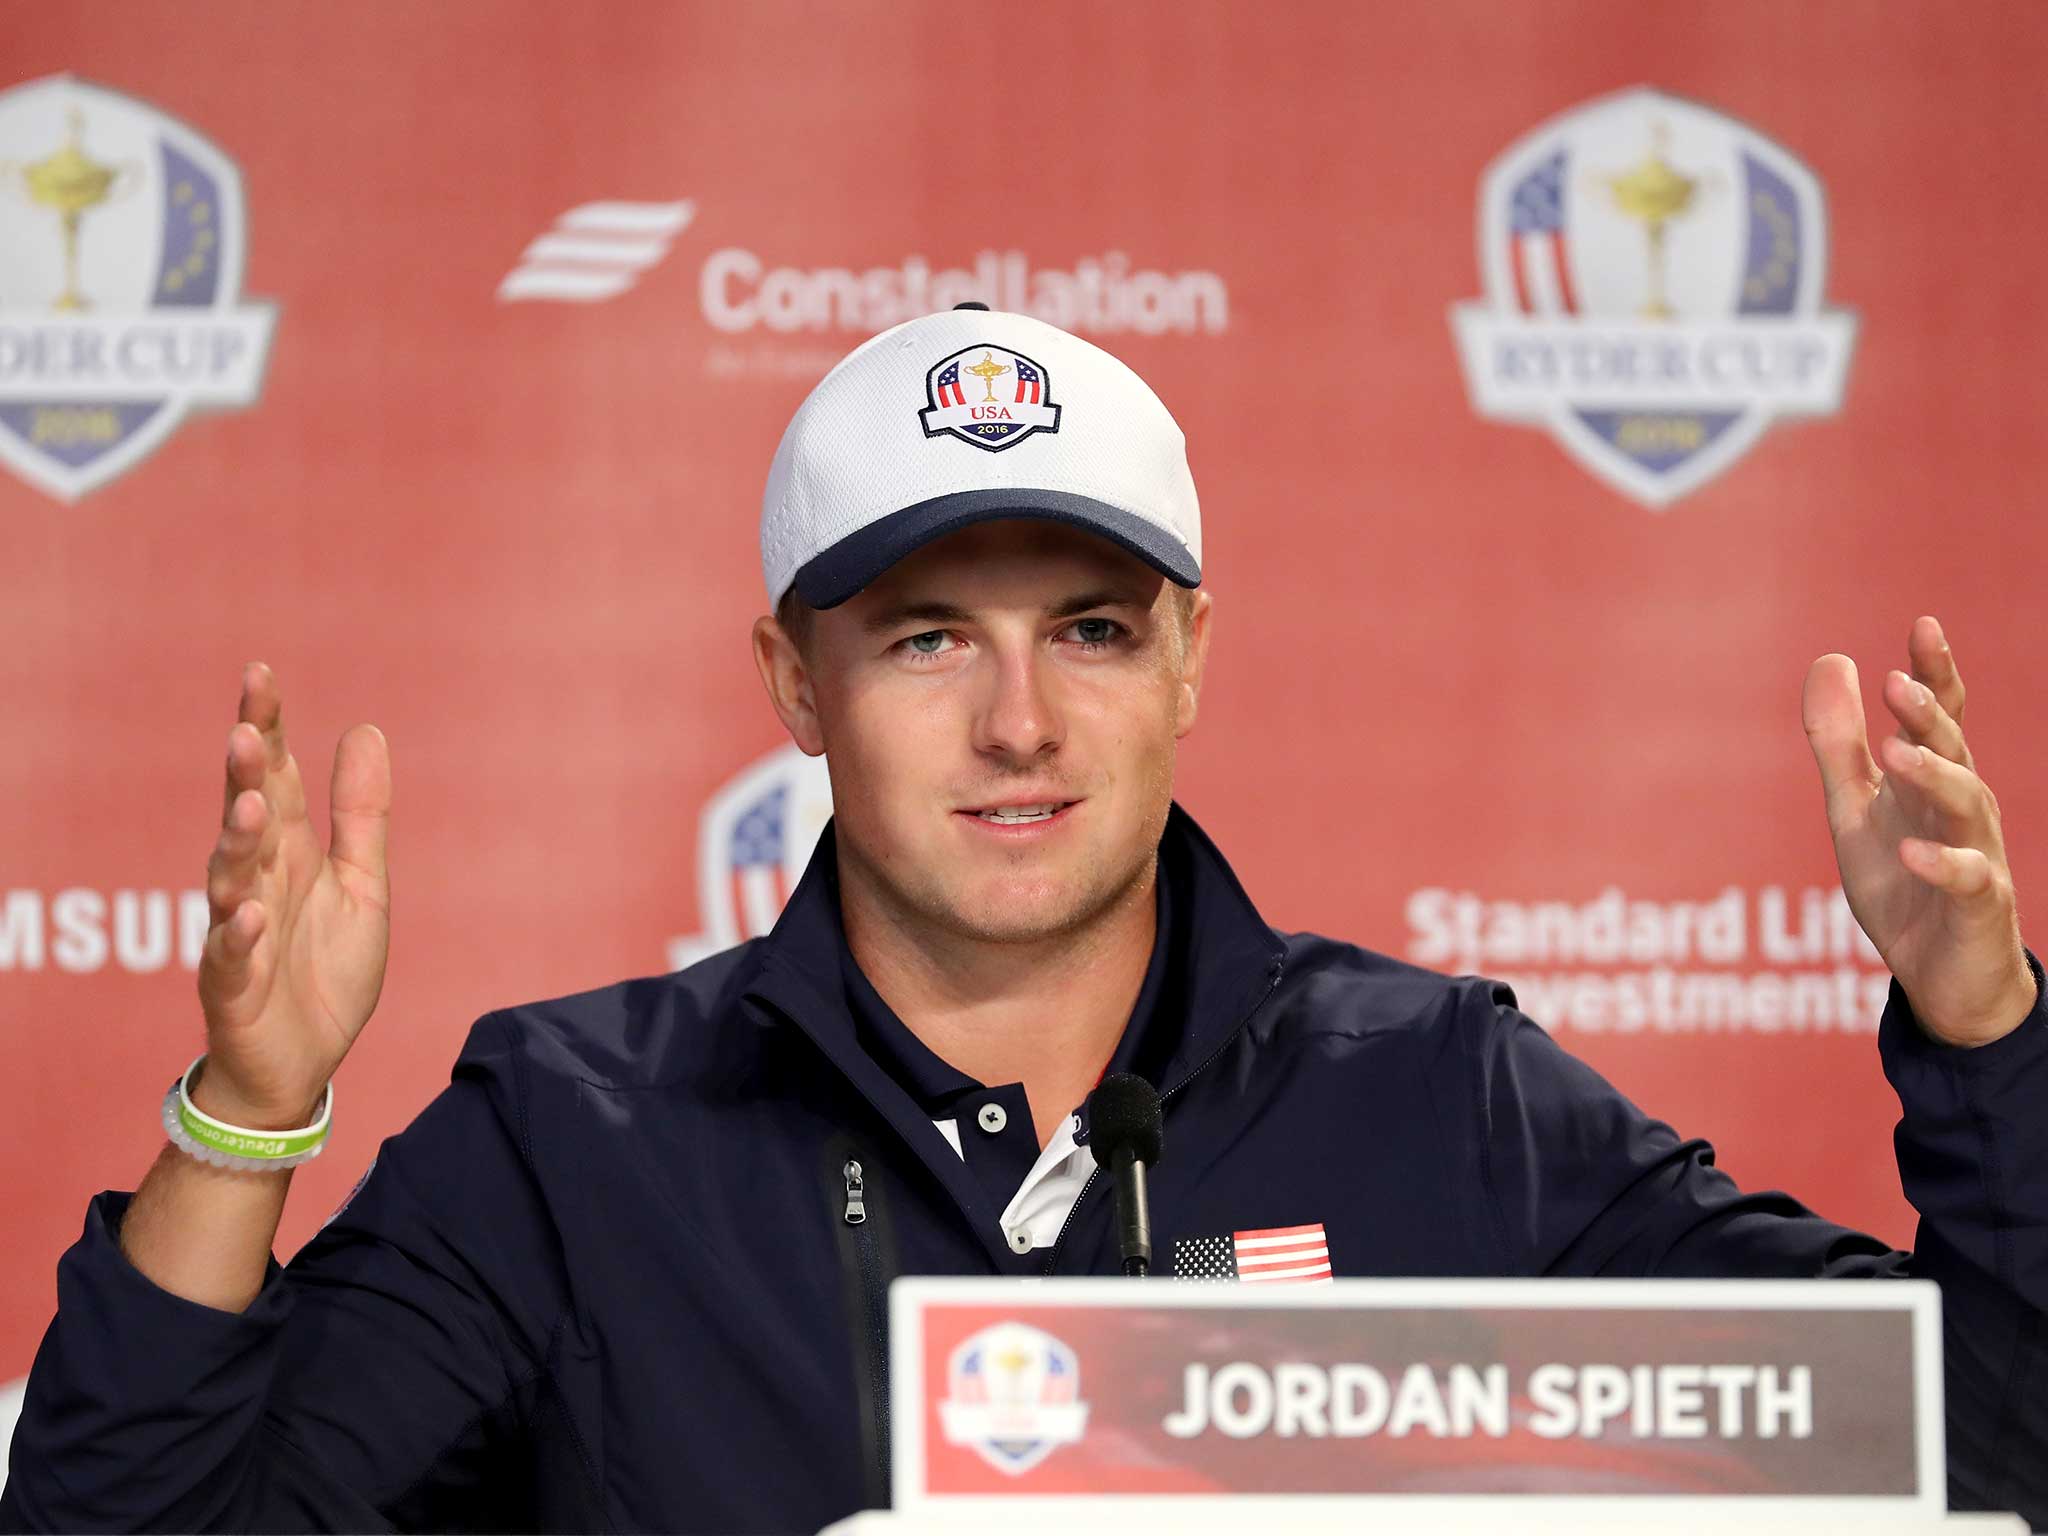 Jordan Spieth addresses the media ahead of the Ryder Cup